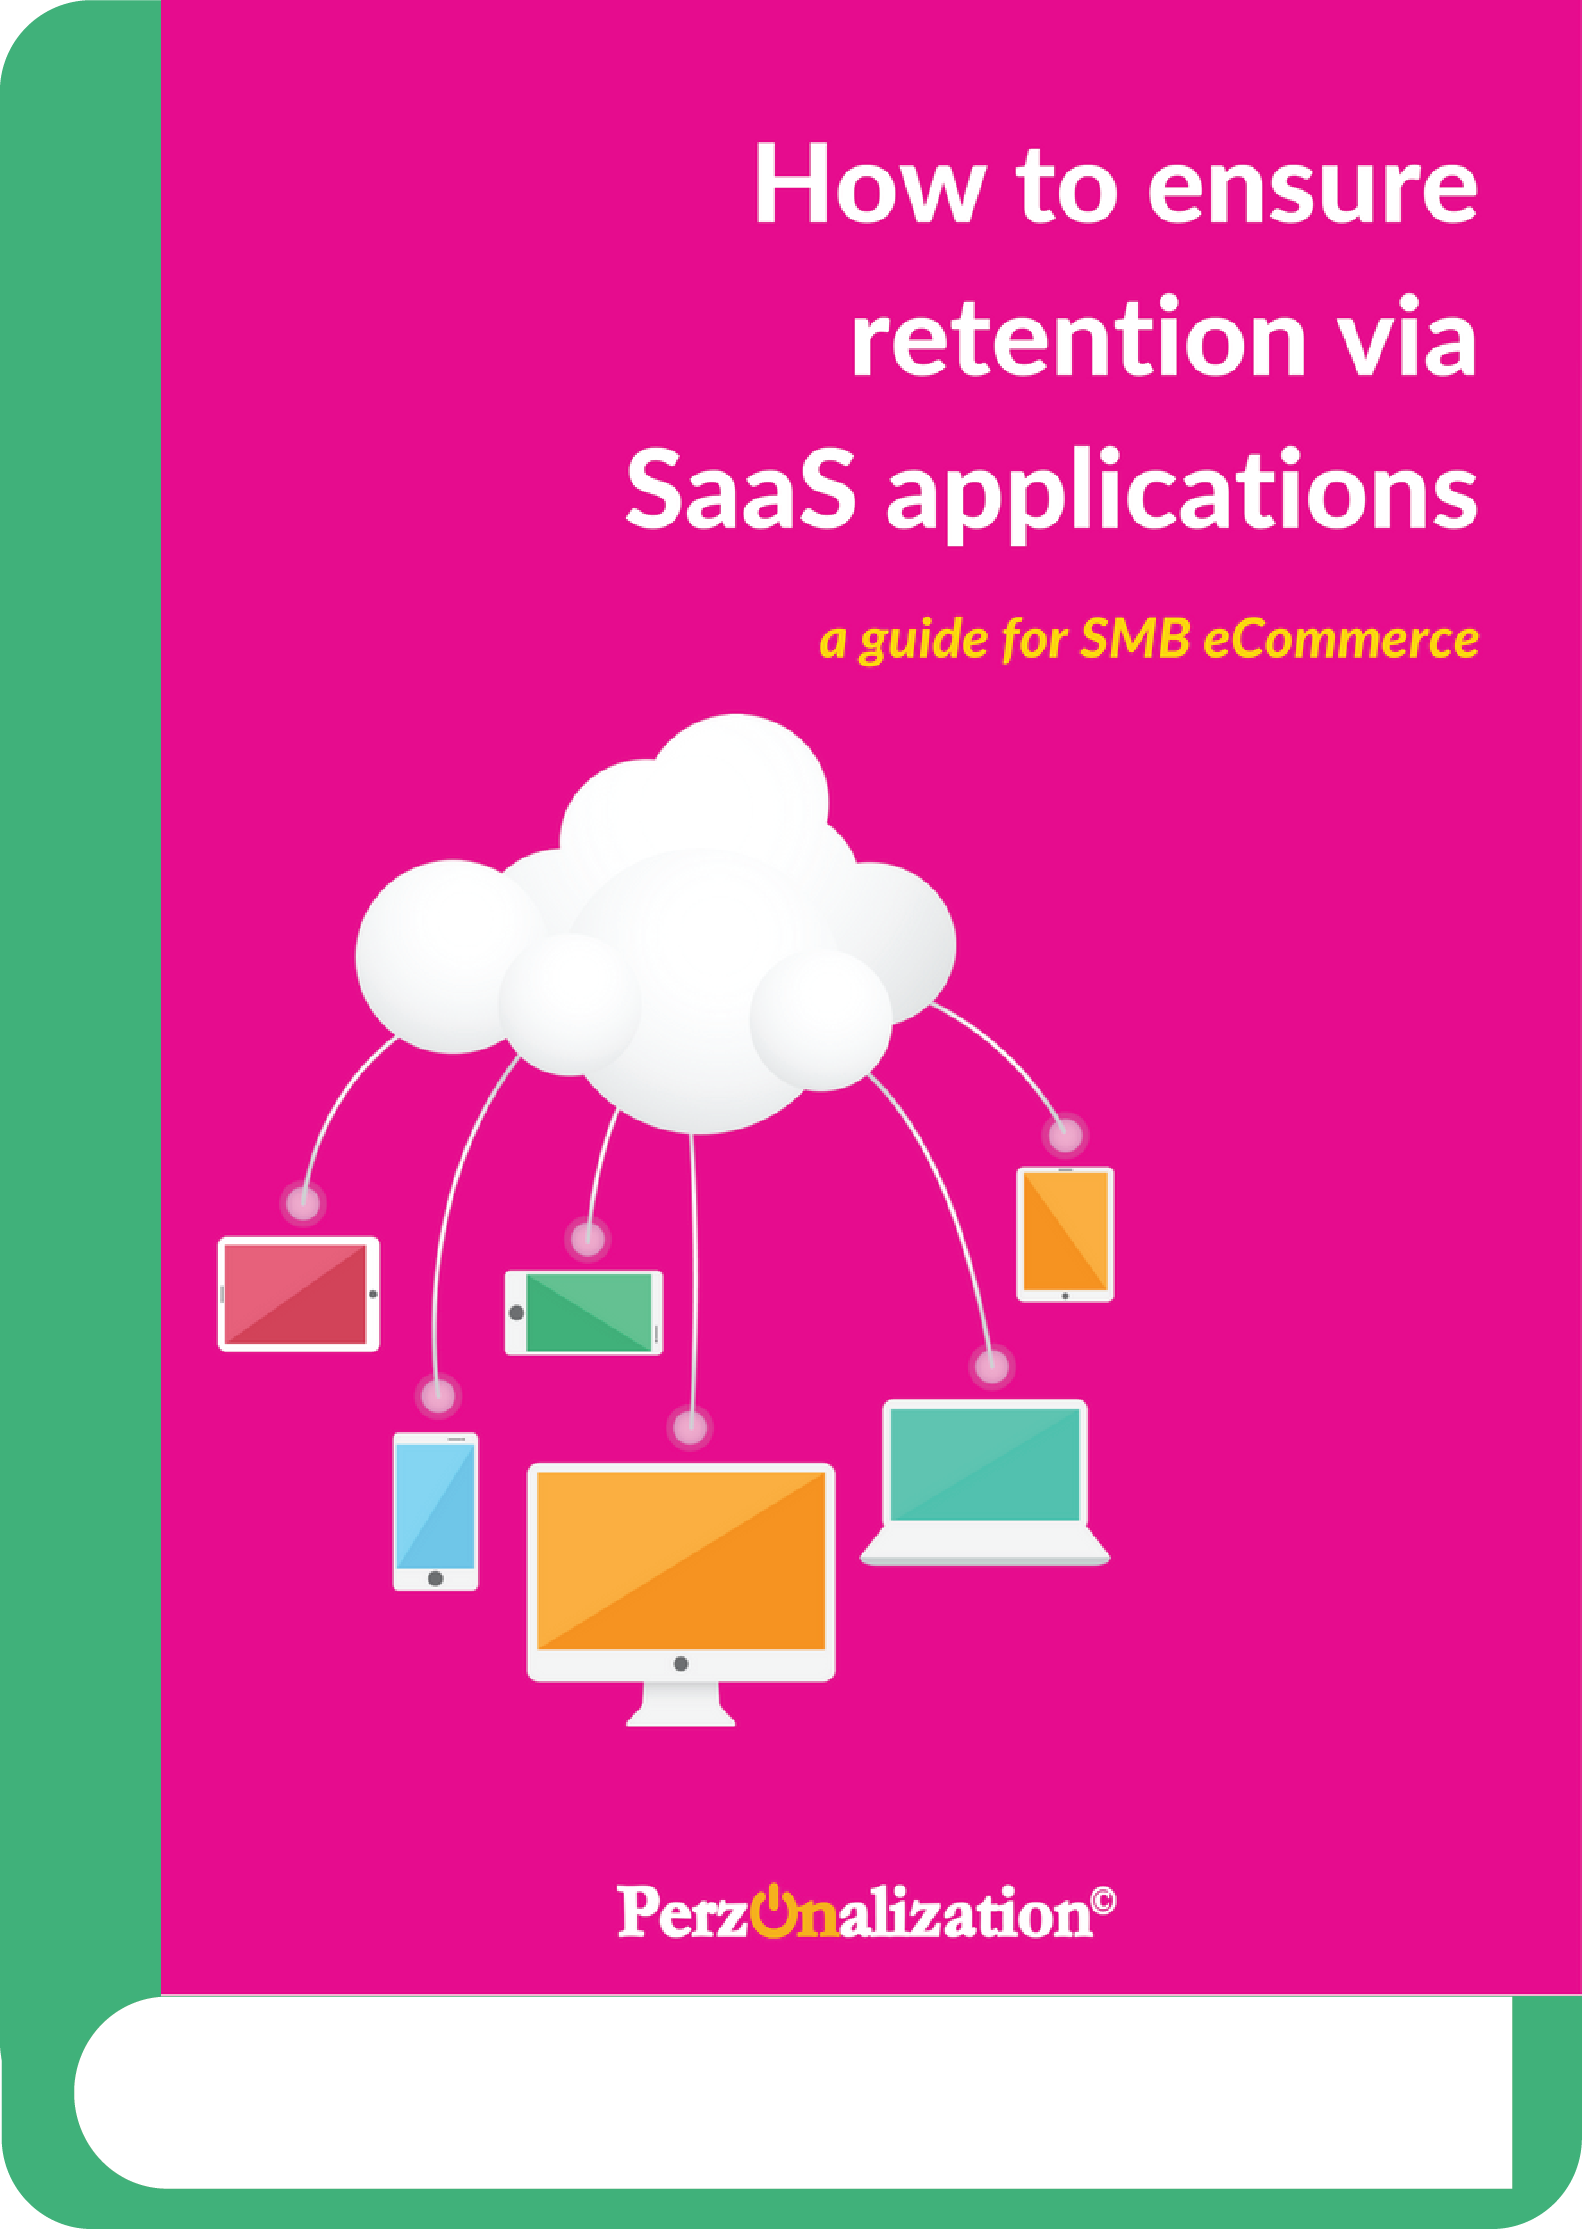 The SaaS applications can both save you time and money if you are a small business eCommerce owner. Discover more in our free eBook.